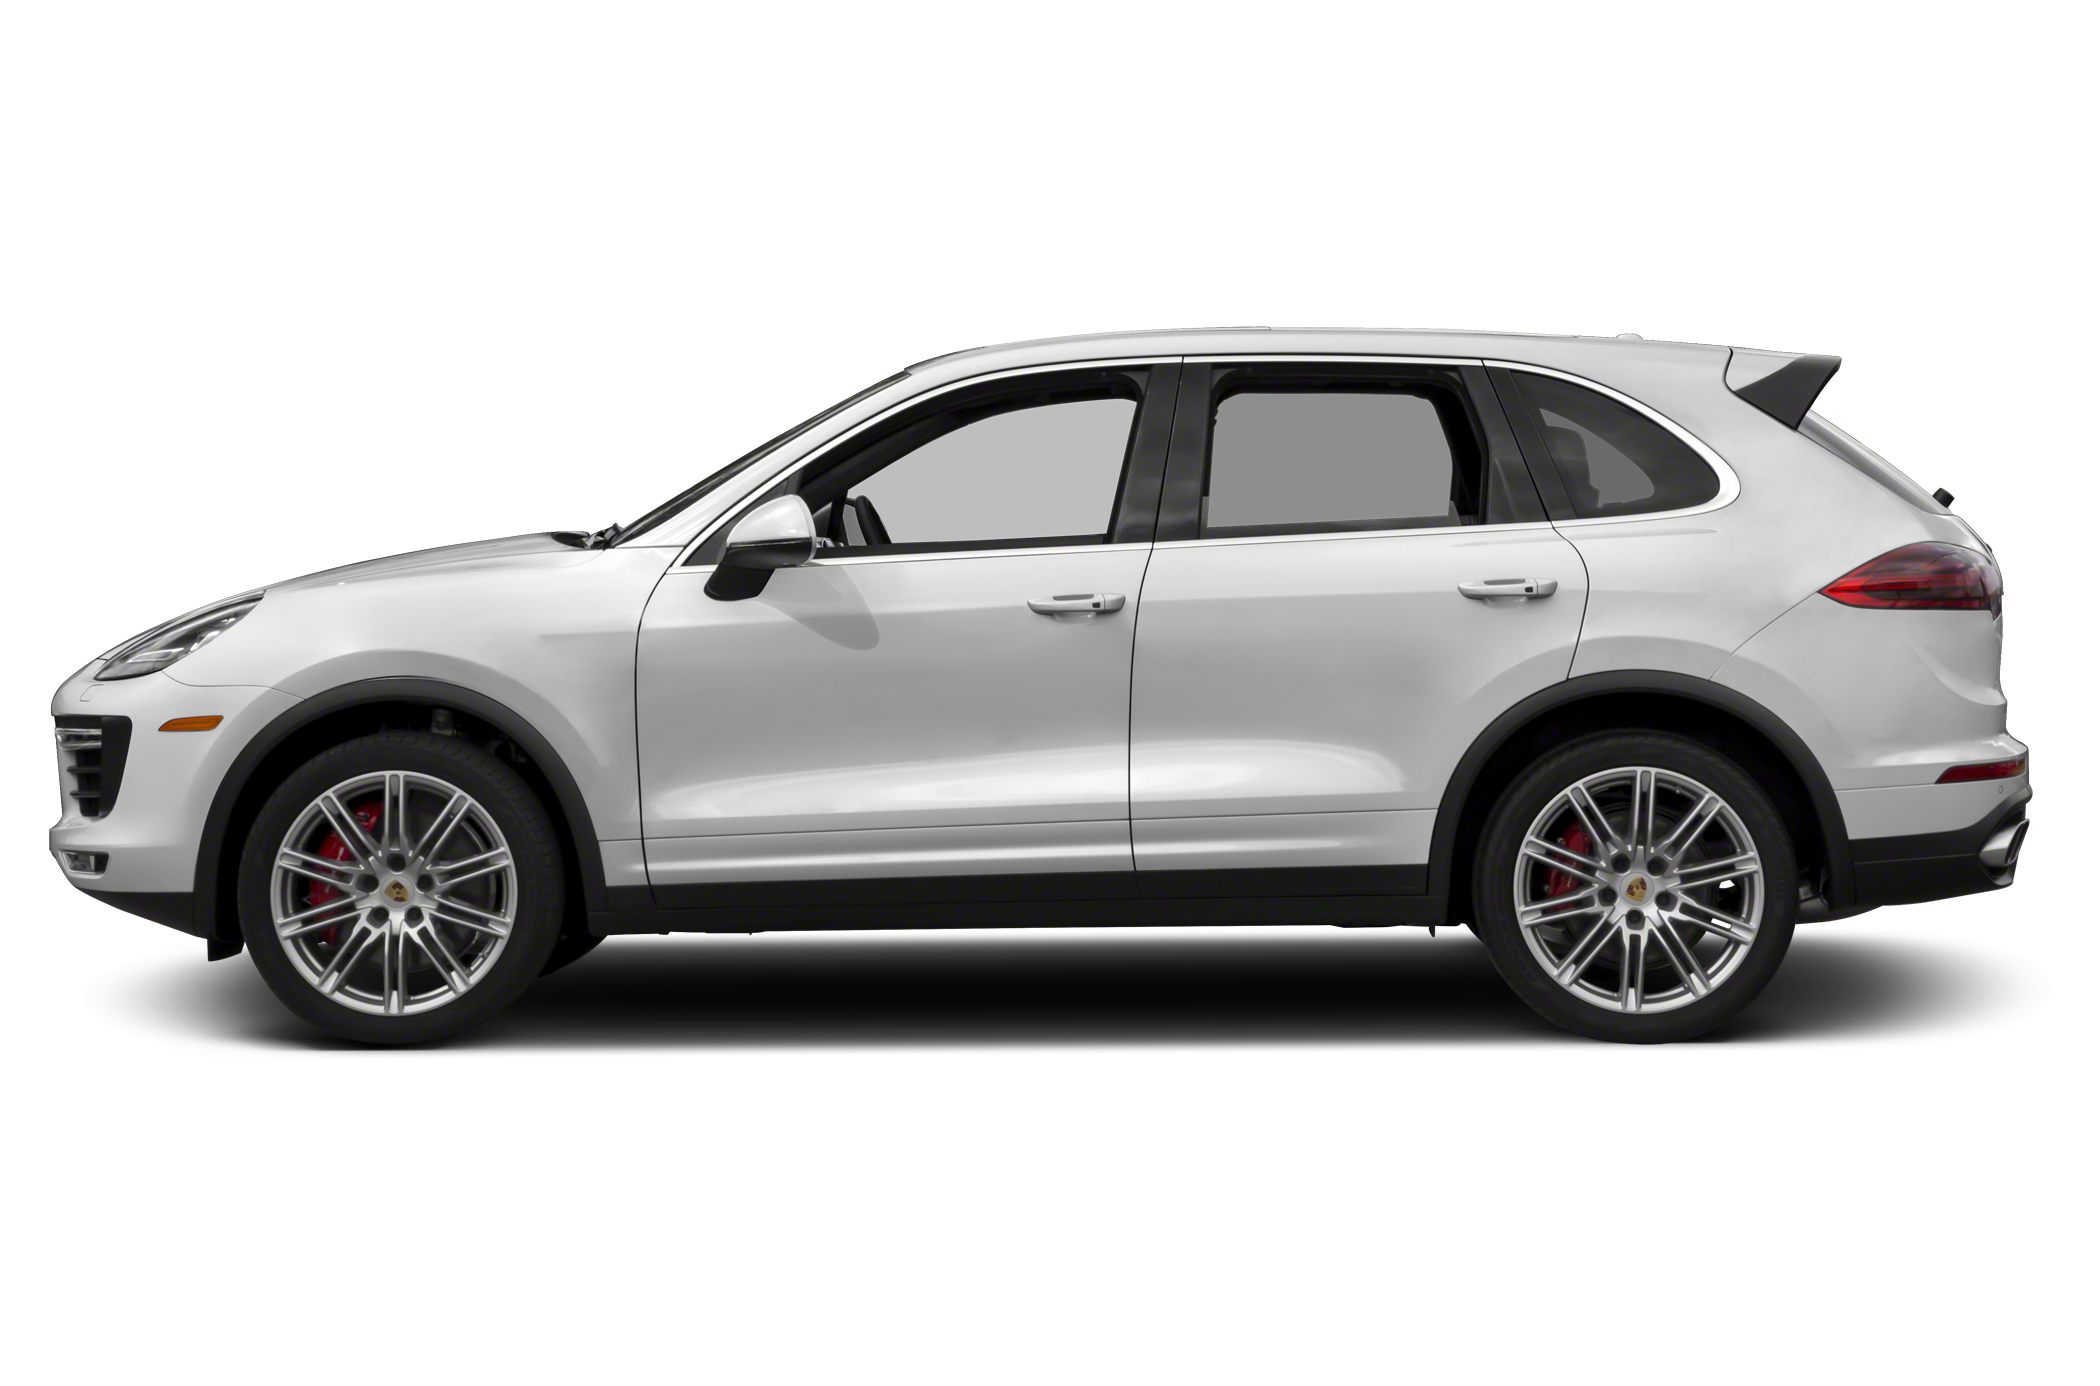 2016 Porsche Cayenne Turbo S 4dr All-wheel Drive Pictures